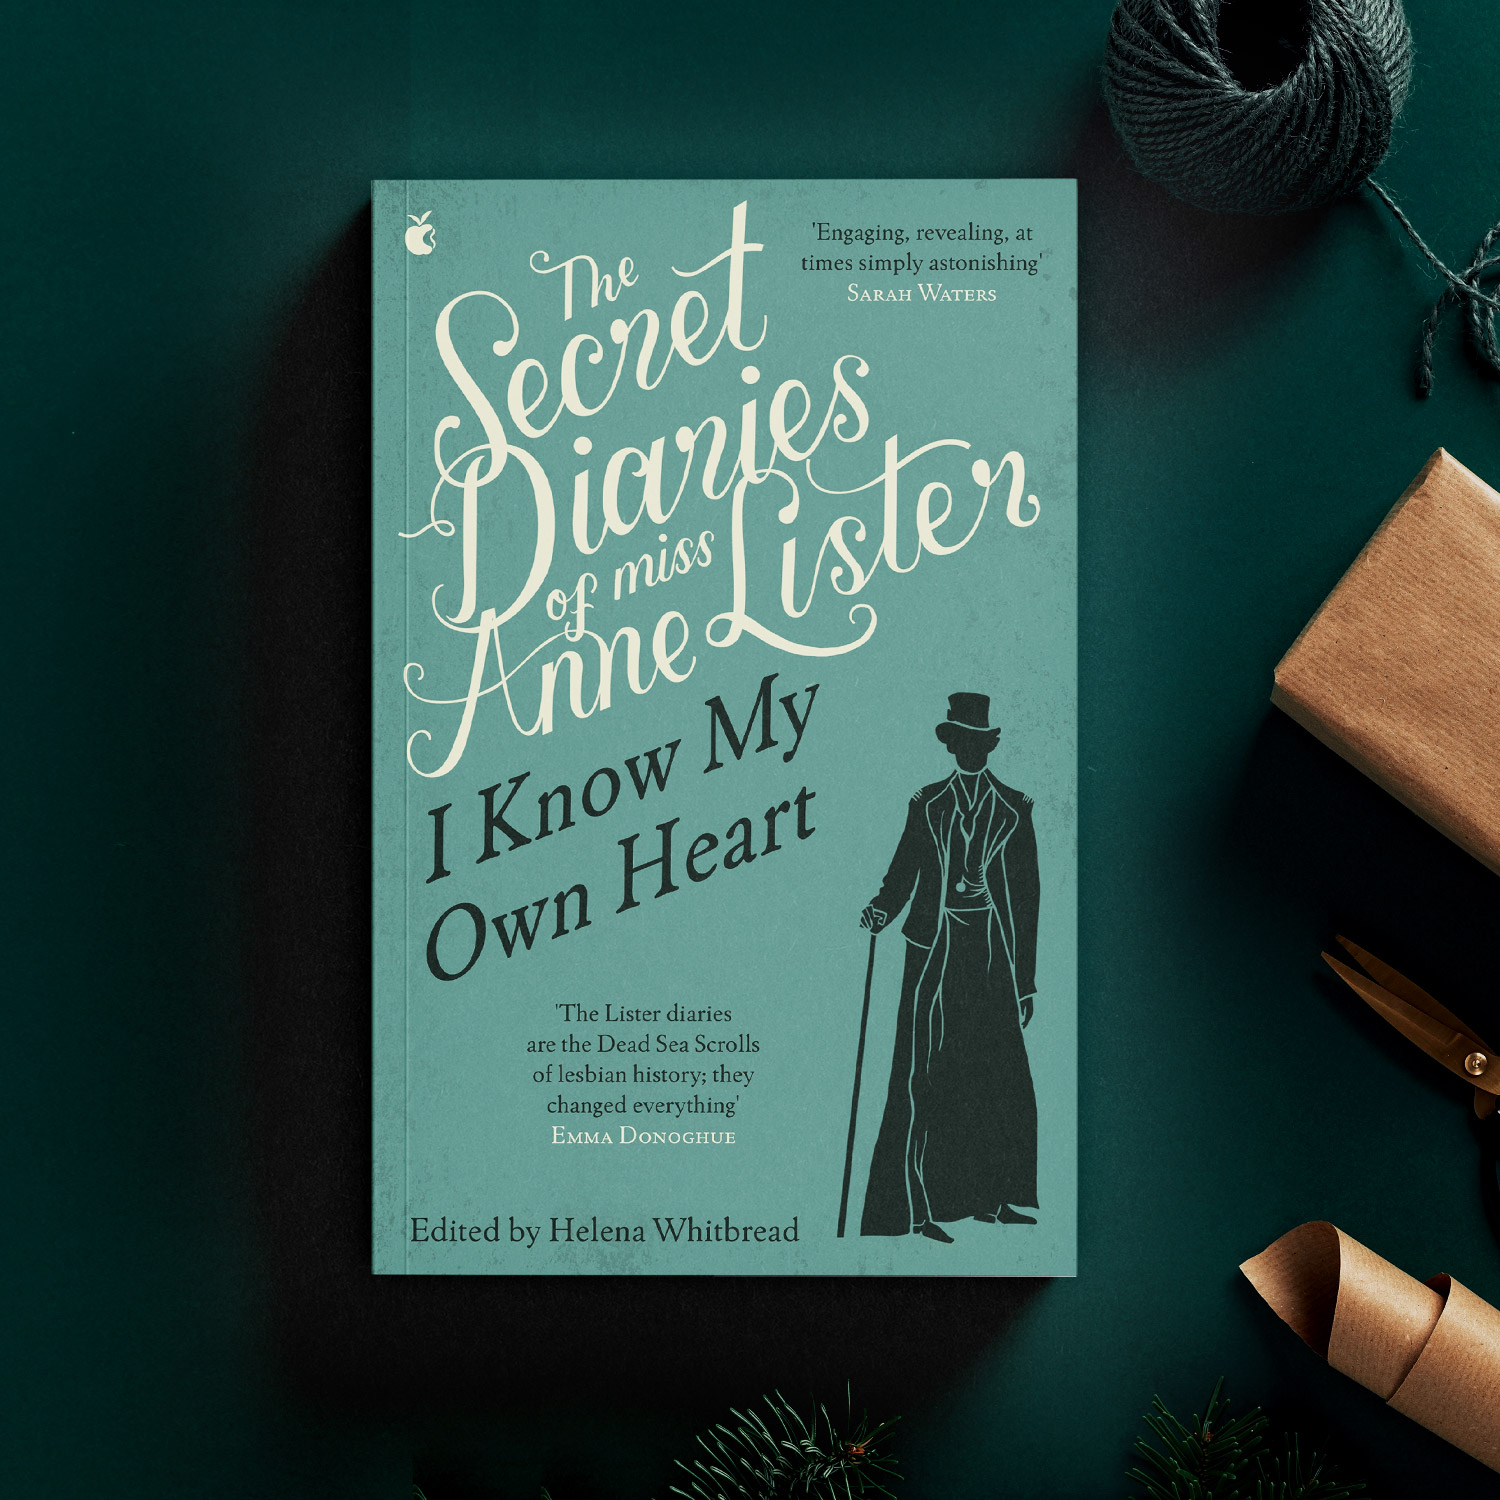 The Secret Diaries of MIss Anne Lister